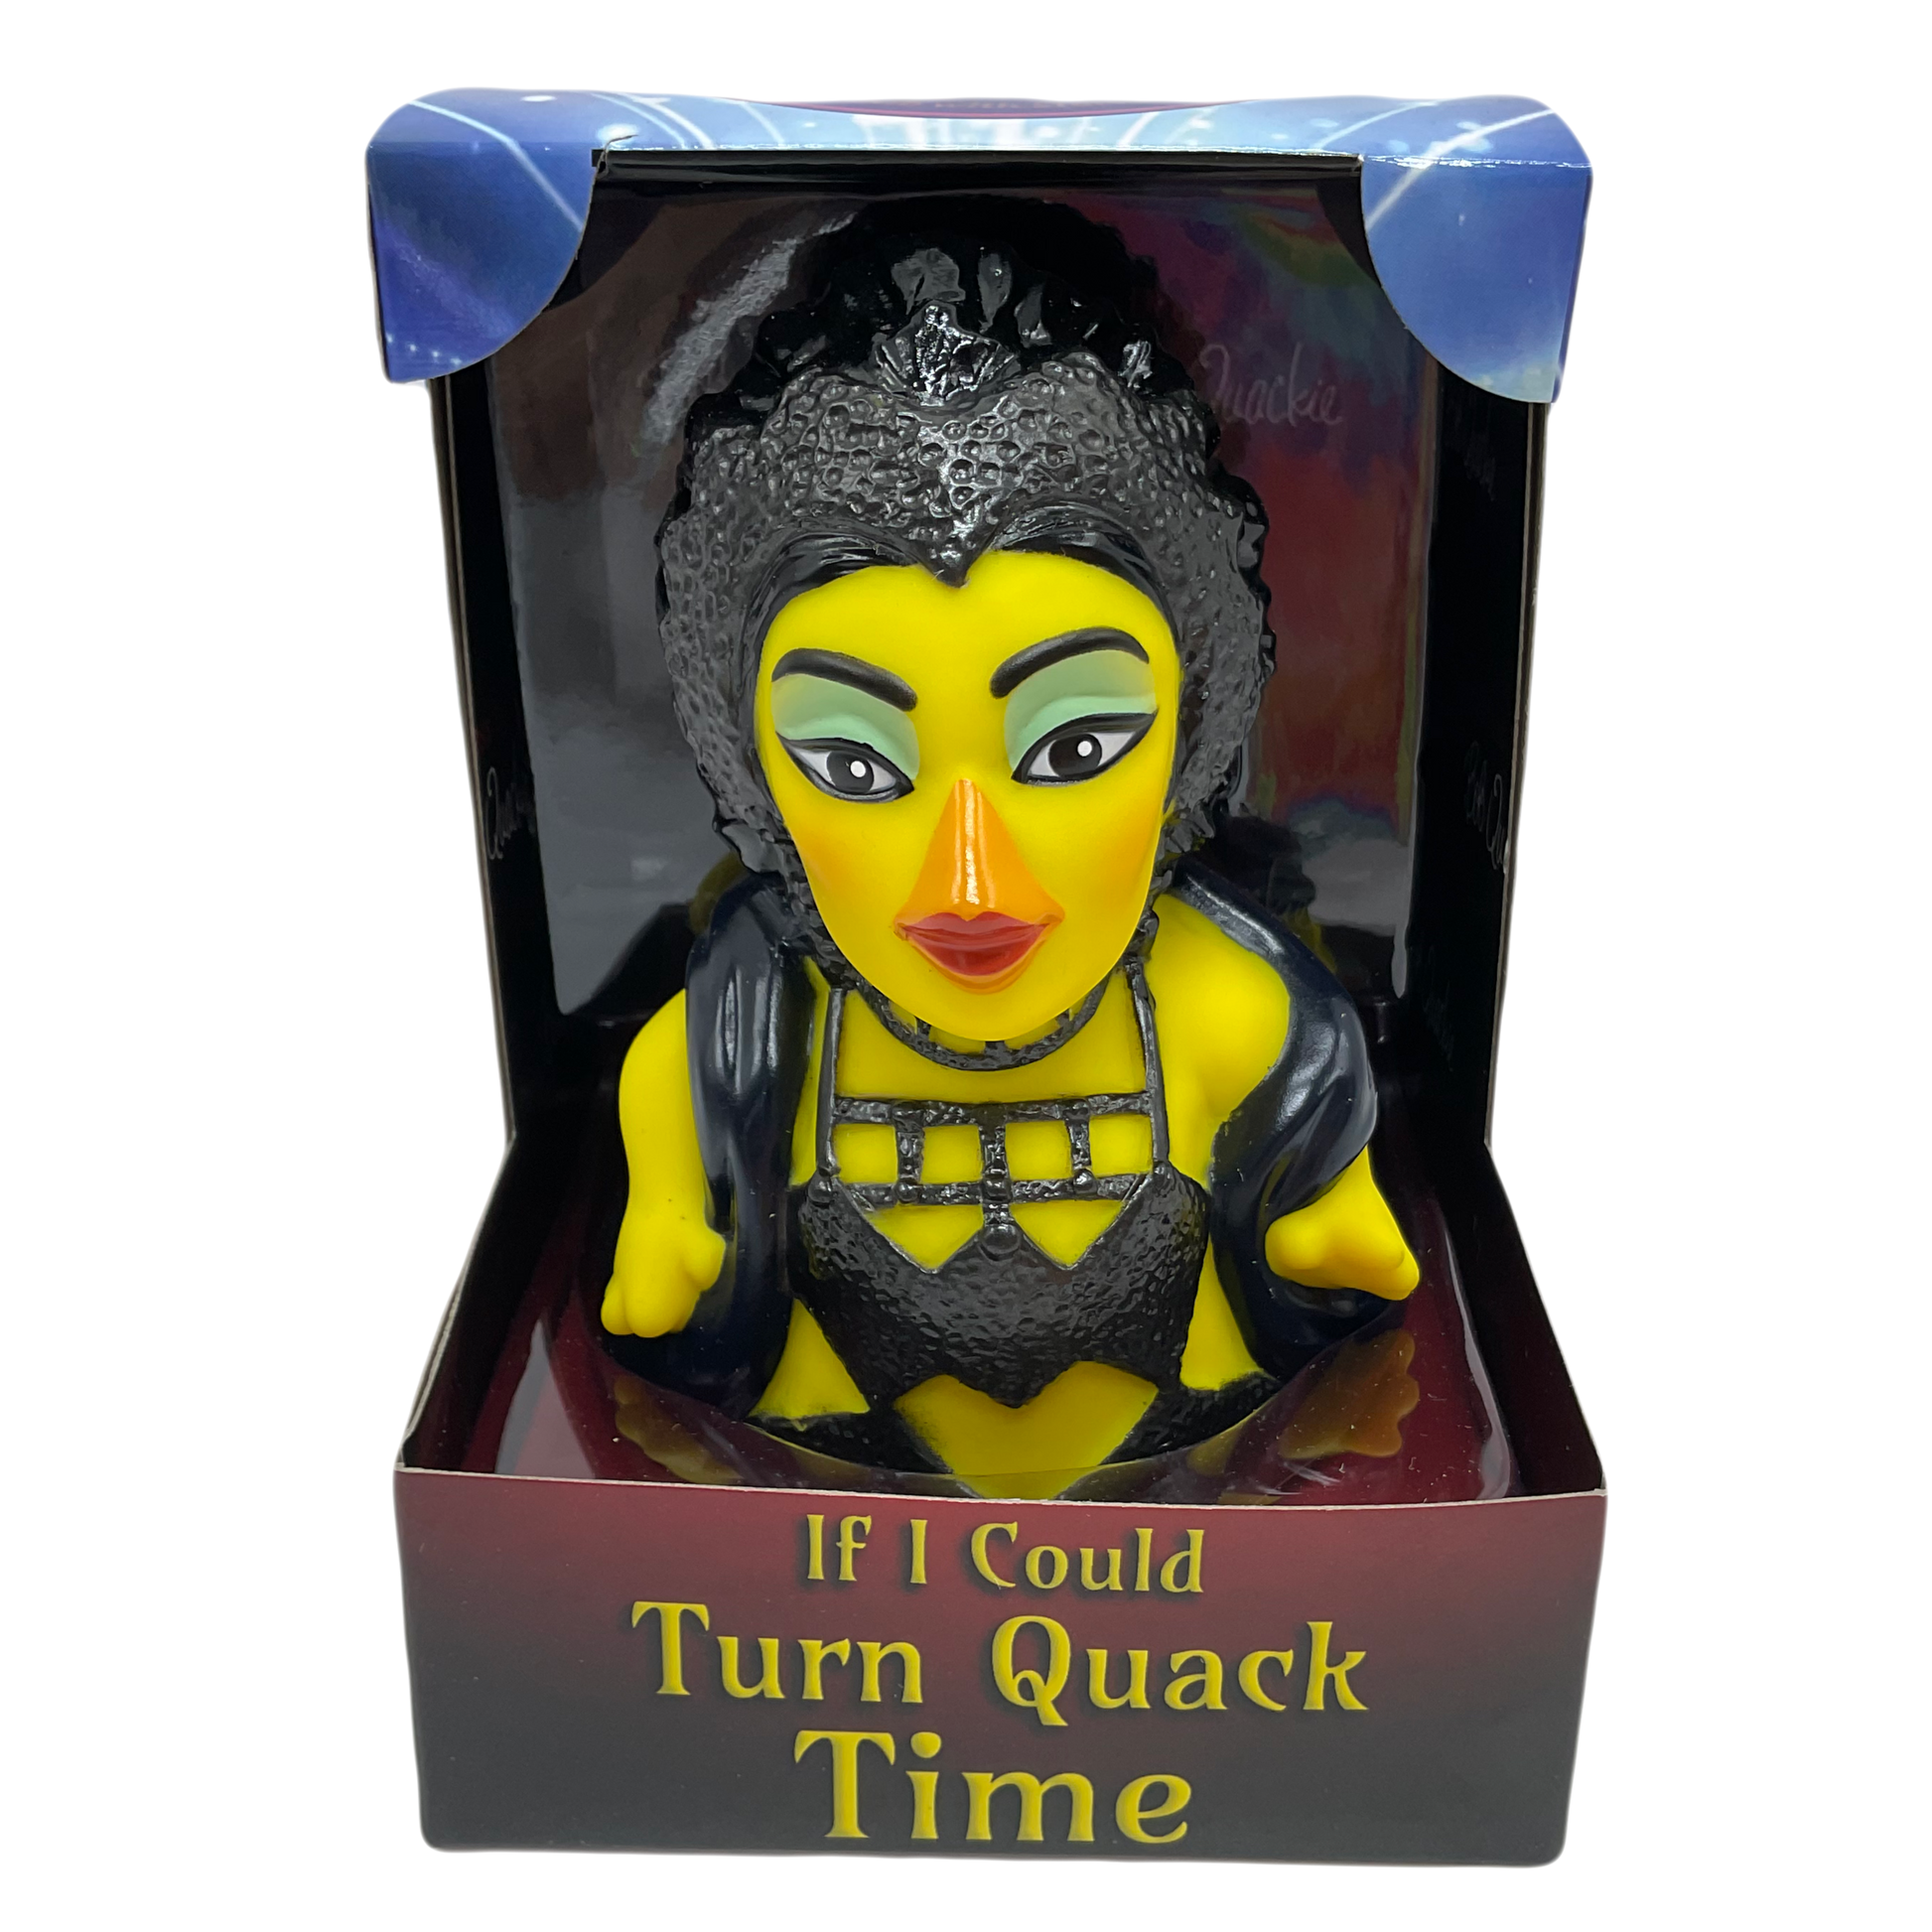 If I Could Turn Quack Time Cher Celebriduck Rubber Duck